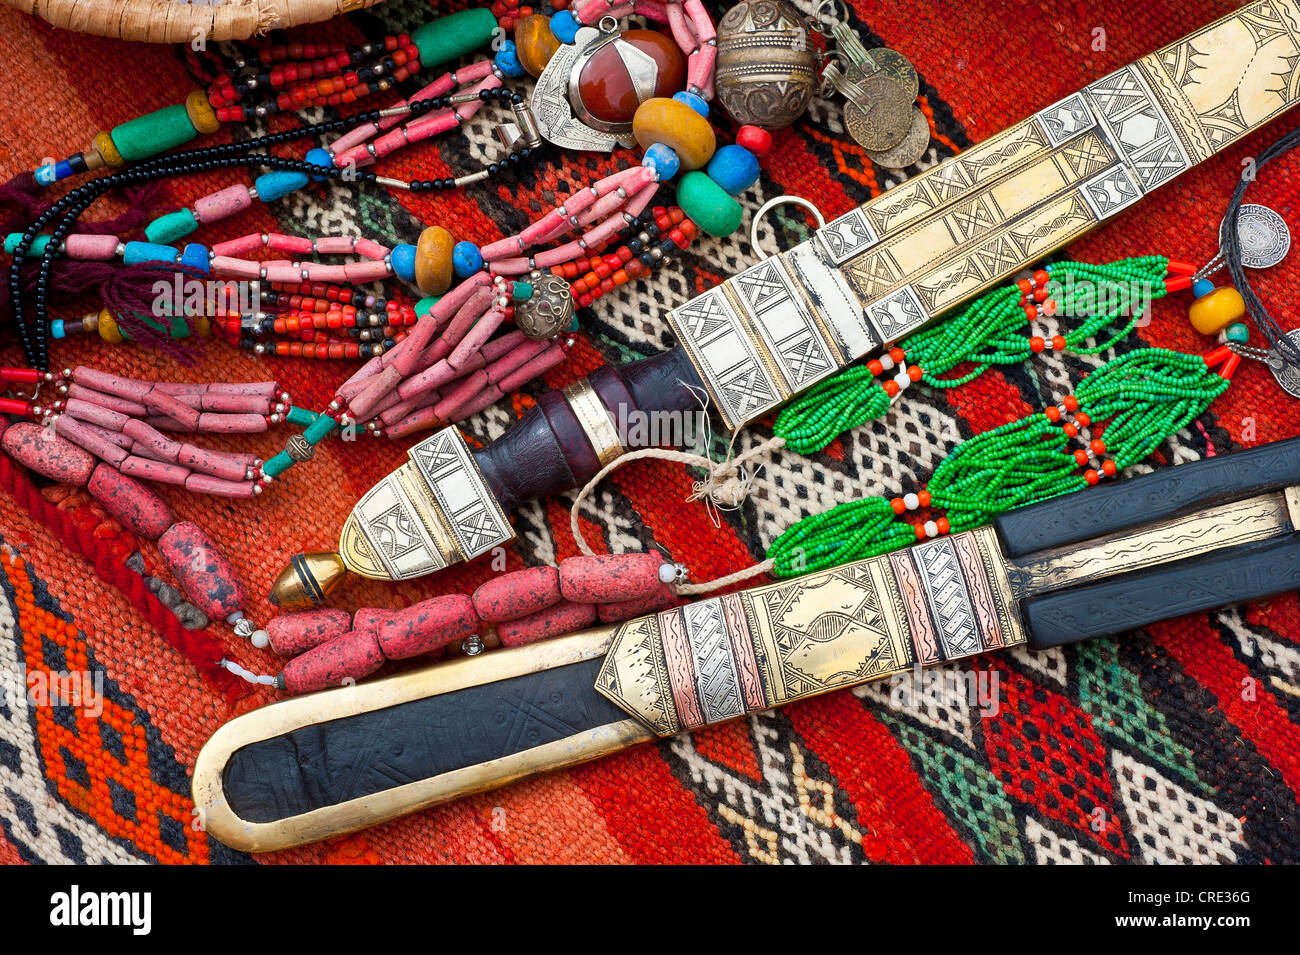 Oriental jewellery and ornate Touareg knives are spread on a carpet in a souk or bazaar, Morocco, Africa Stock Photo